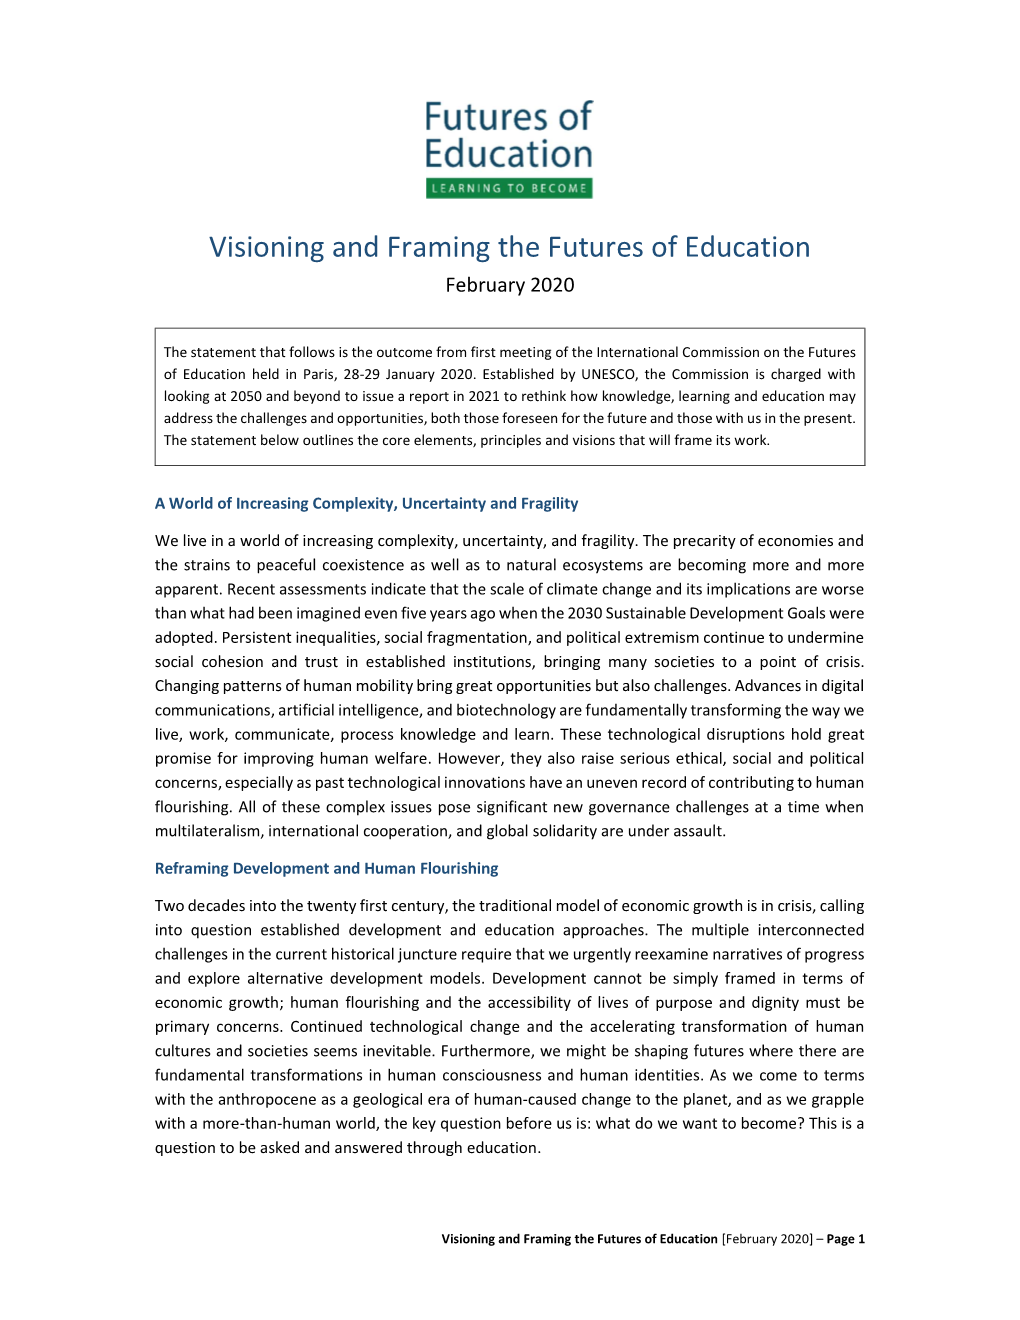 Visioning and Framing the Futures of Education February 2020